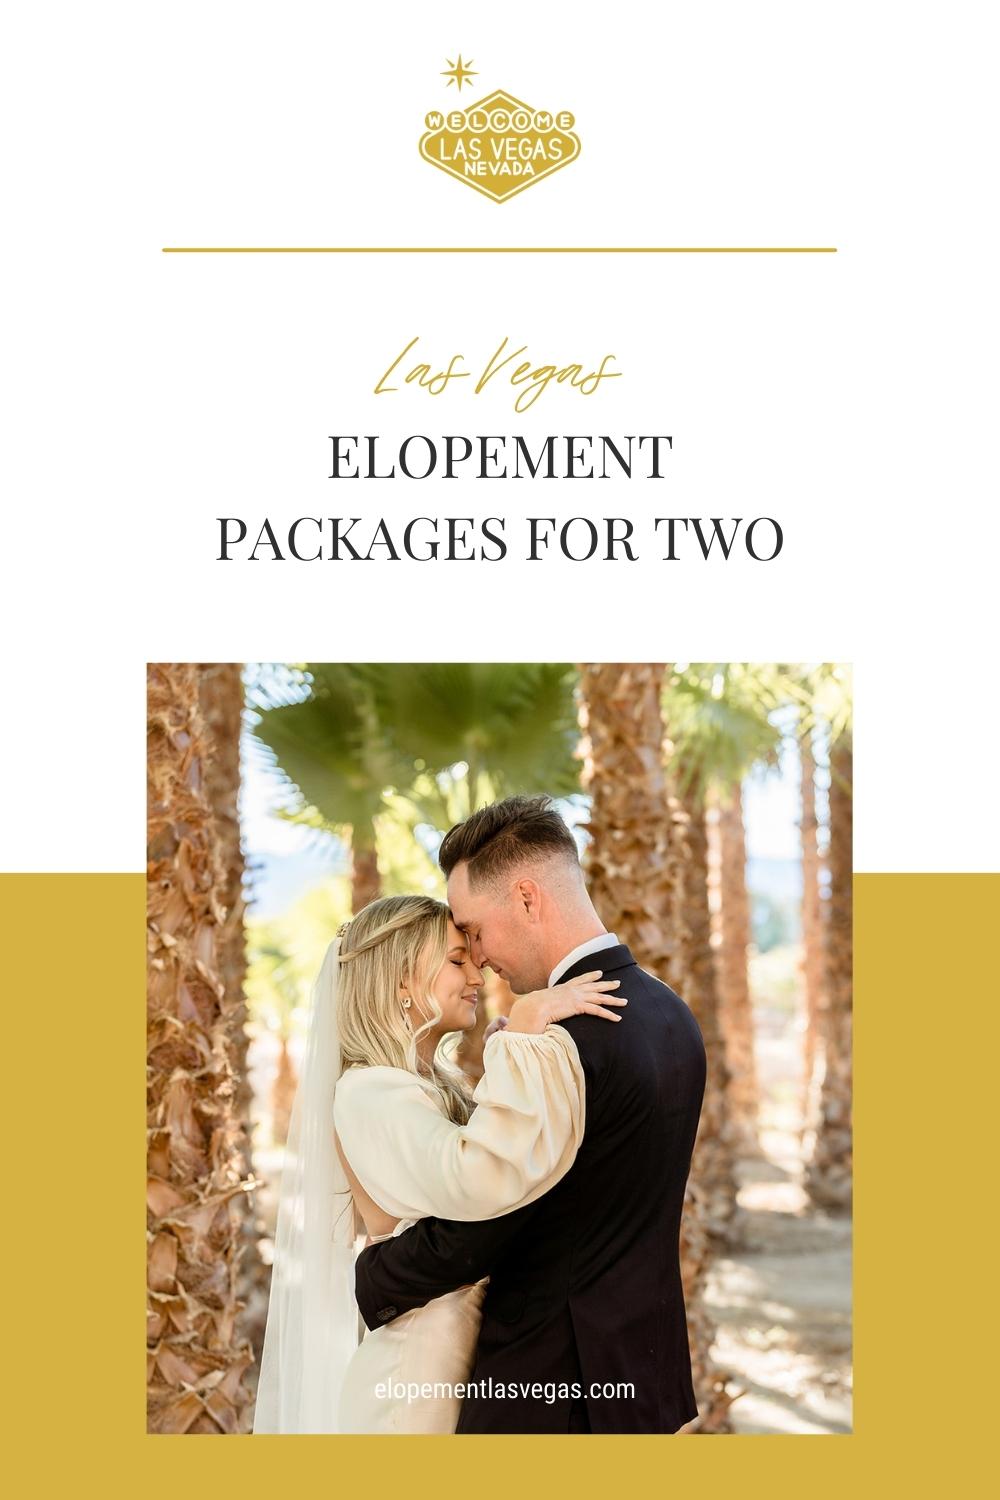 Bride and groom pressing their foreheads as they embrace; image overlaid with text that reads Las Vegas Elopement Packages for Two